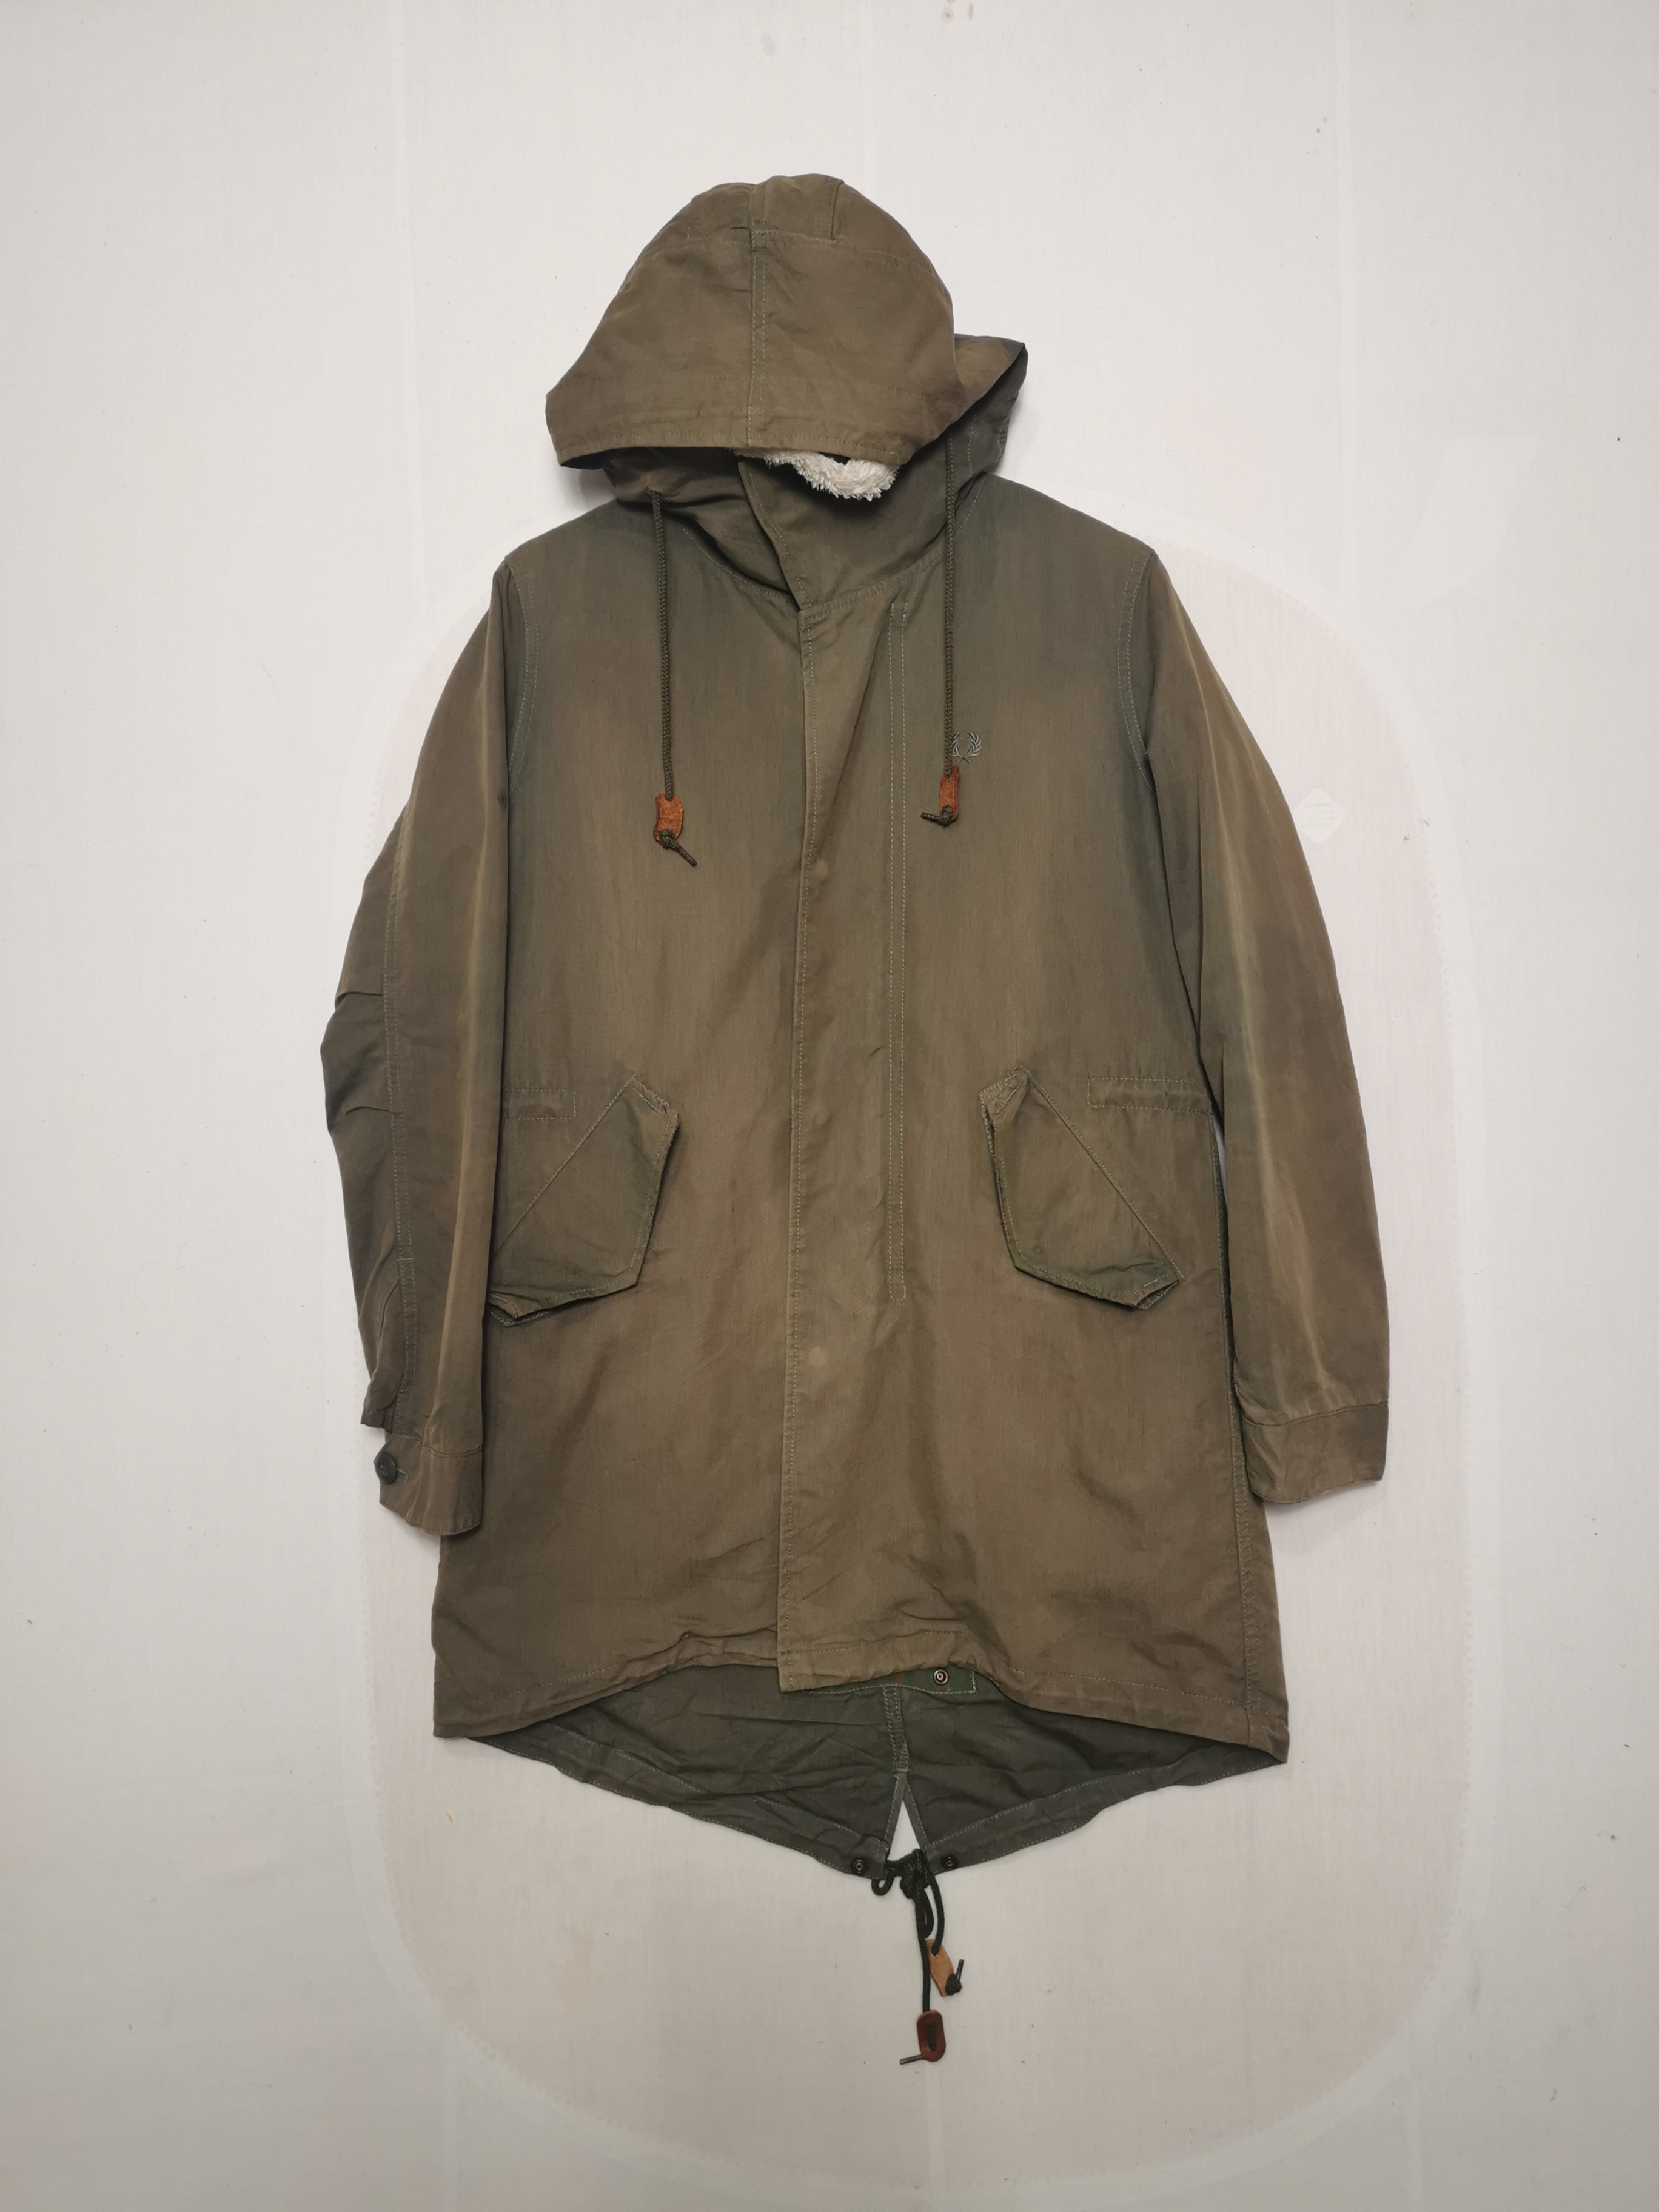 Fred Perry Fishtail Parka Jacket Great Britain Sherpa - 2